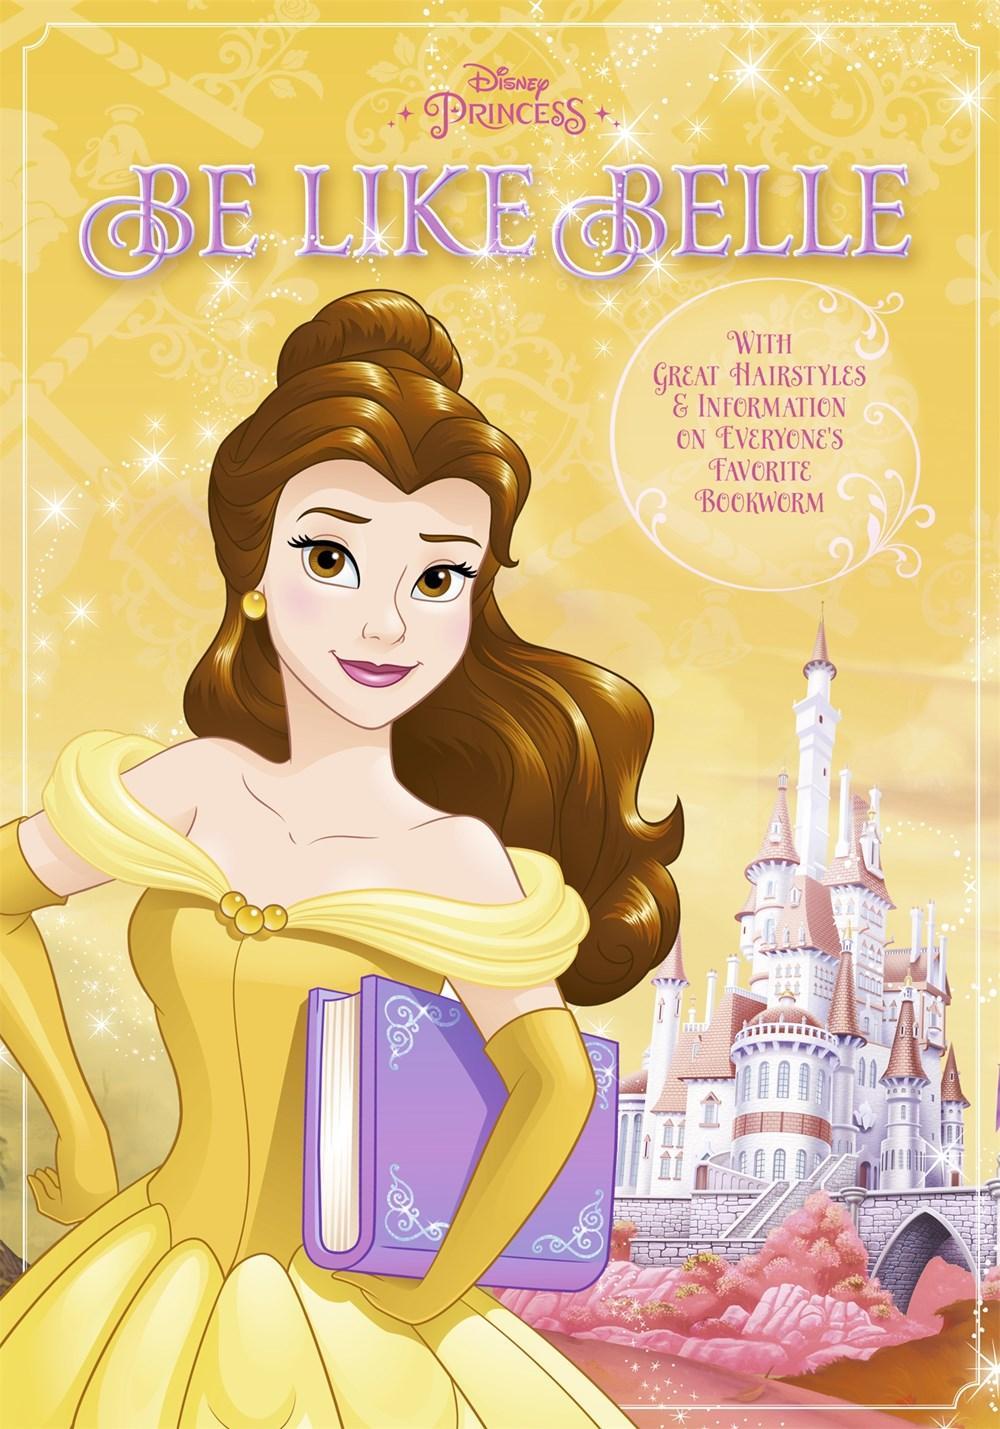 EDDA USA MARCH 2017 Be Like Belle If you have ever admired Belle and her unique style and character traits, this is the book for you.